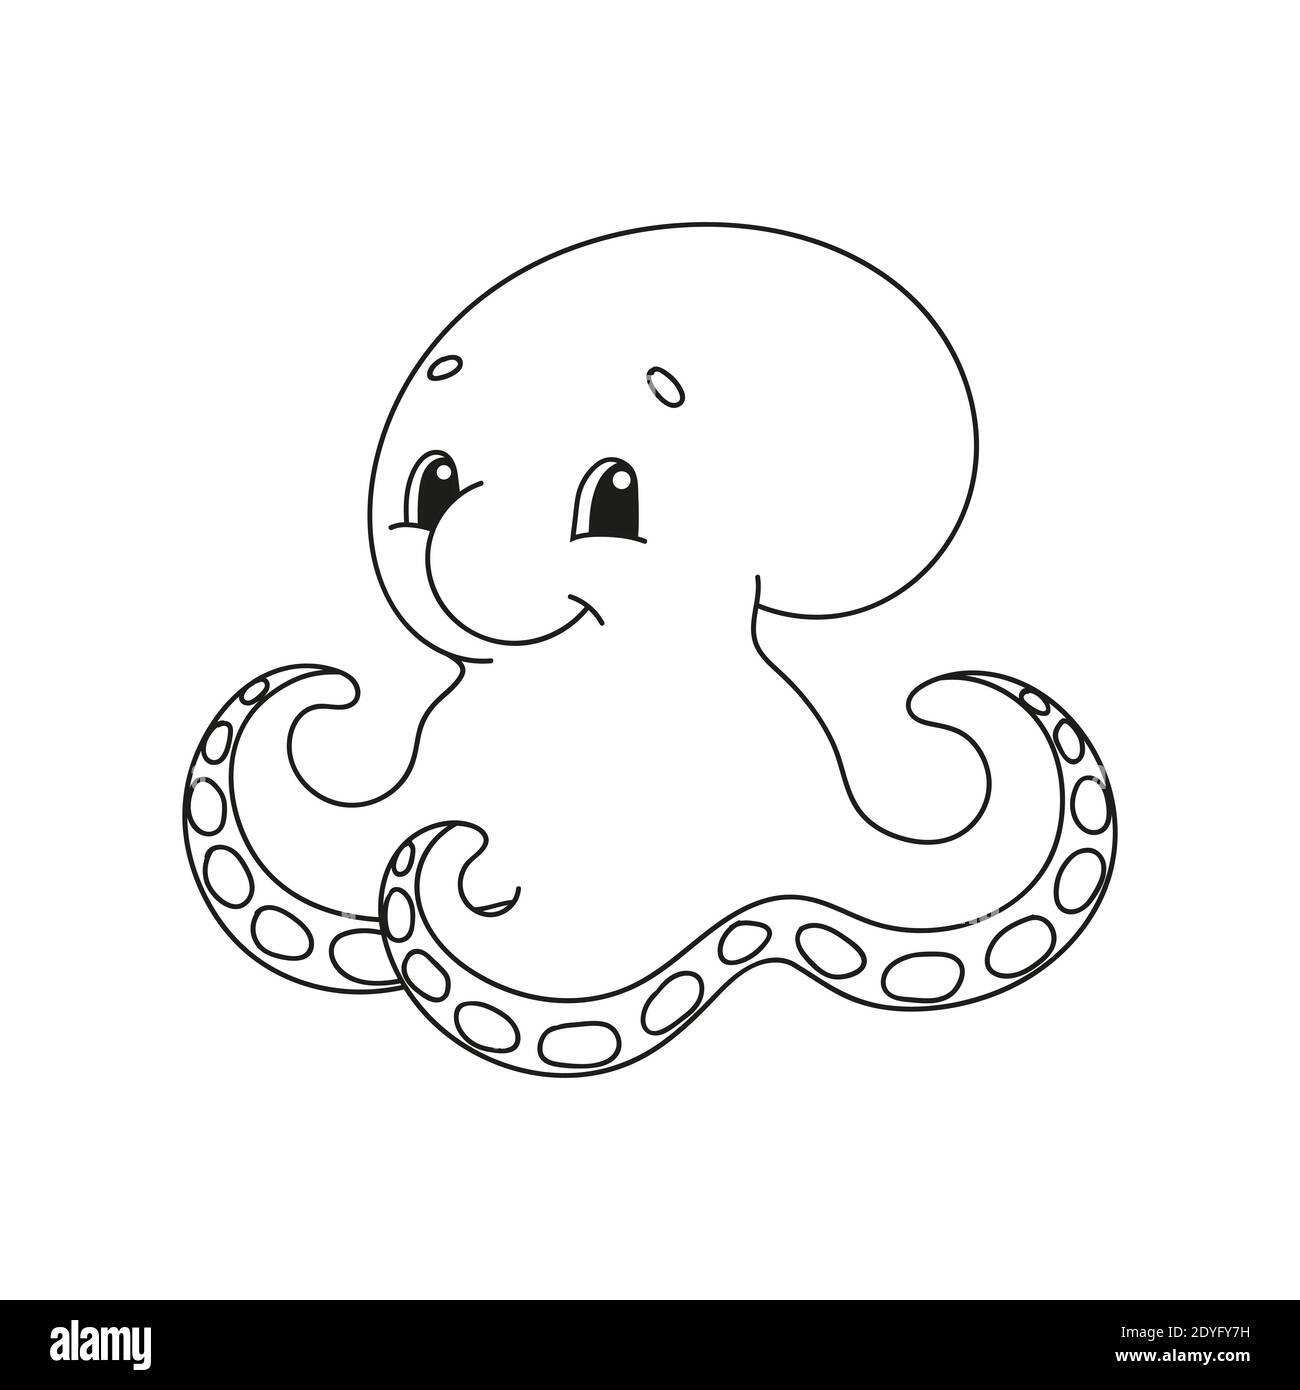 Coloring book pages for kids. Cute cartoon vector illustration Stock ...